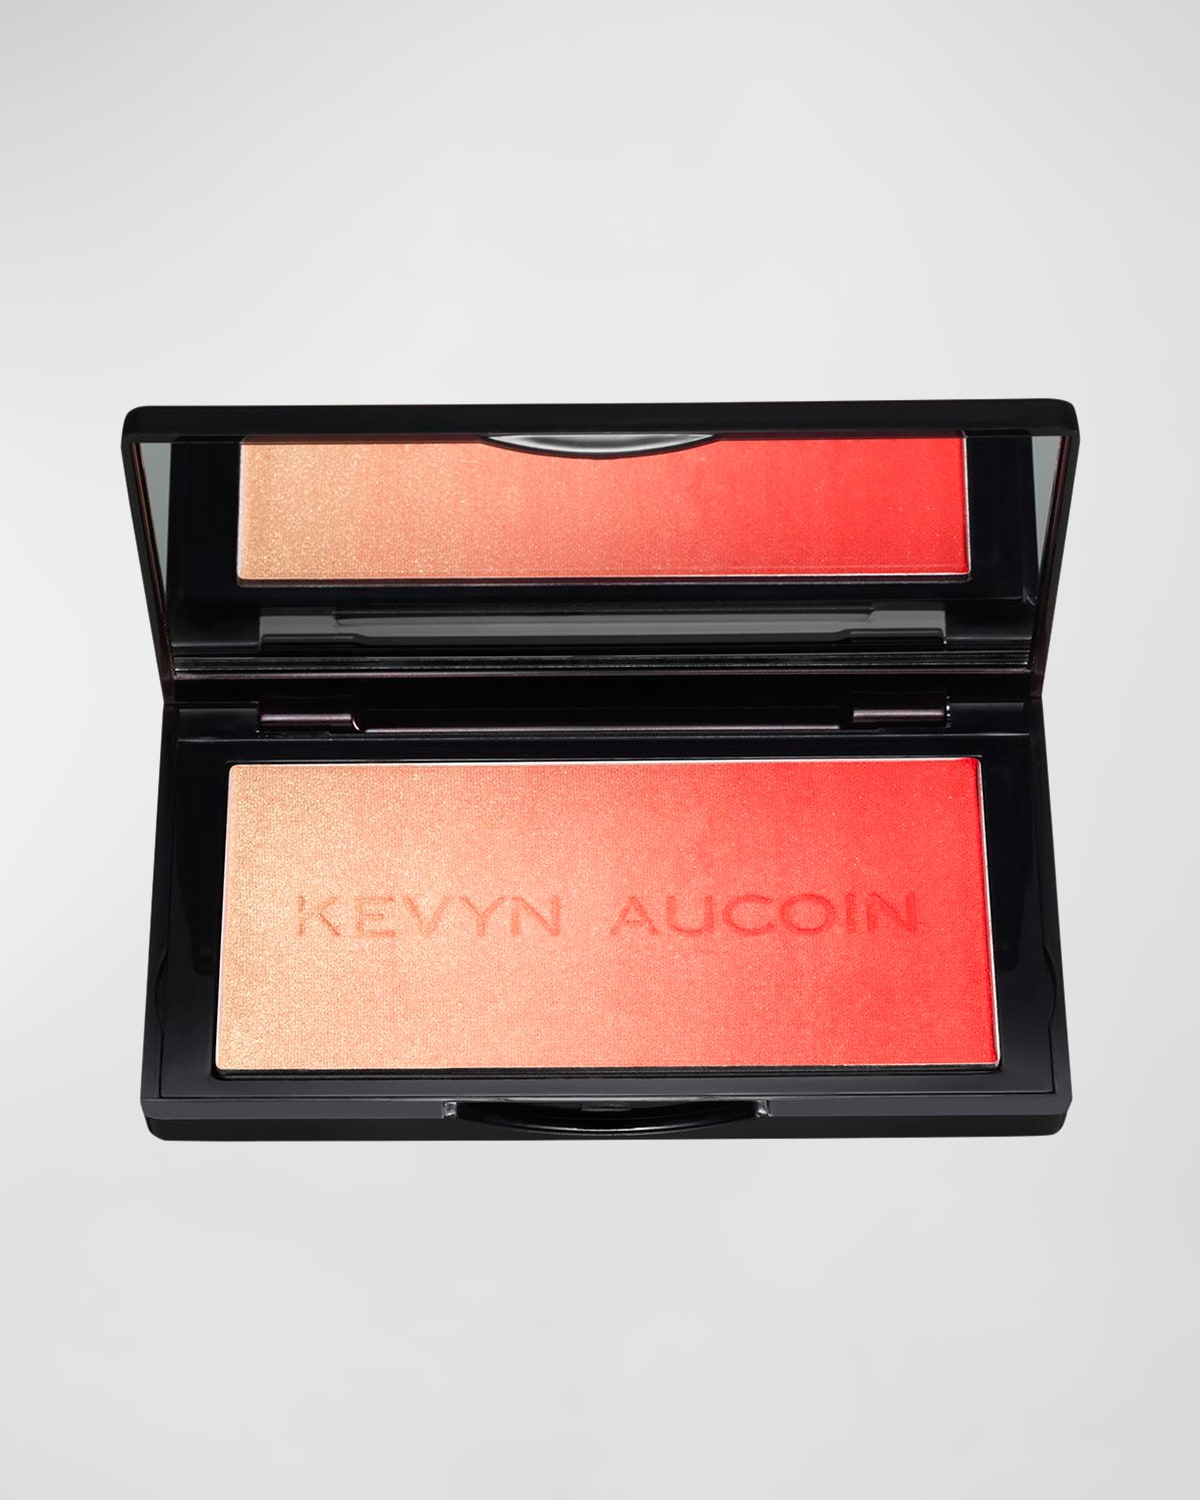 Kevyn Aucoin The Neo-blush In White